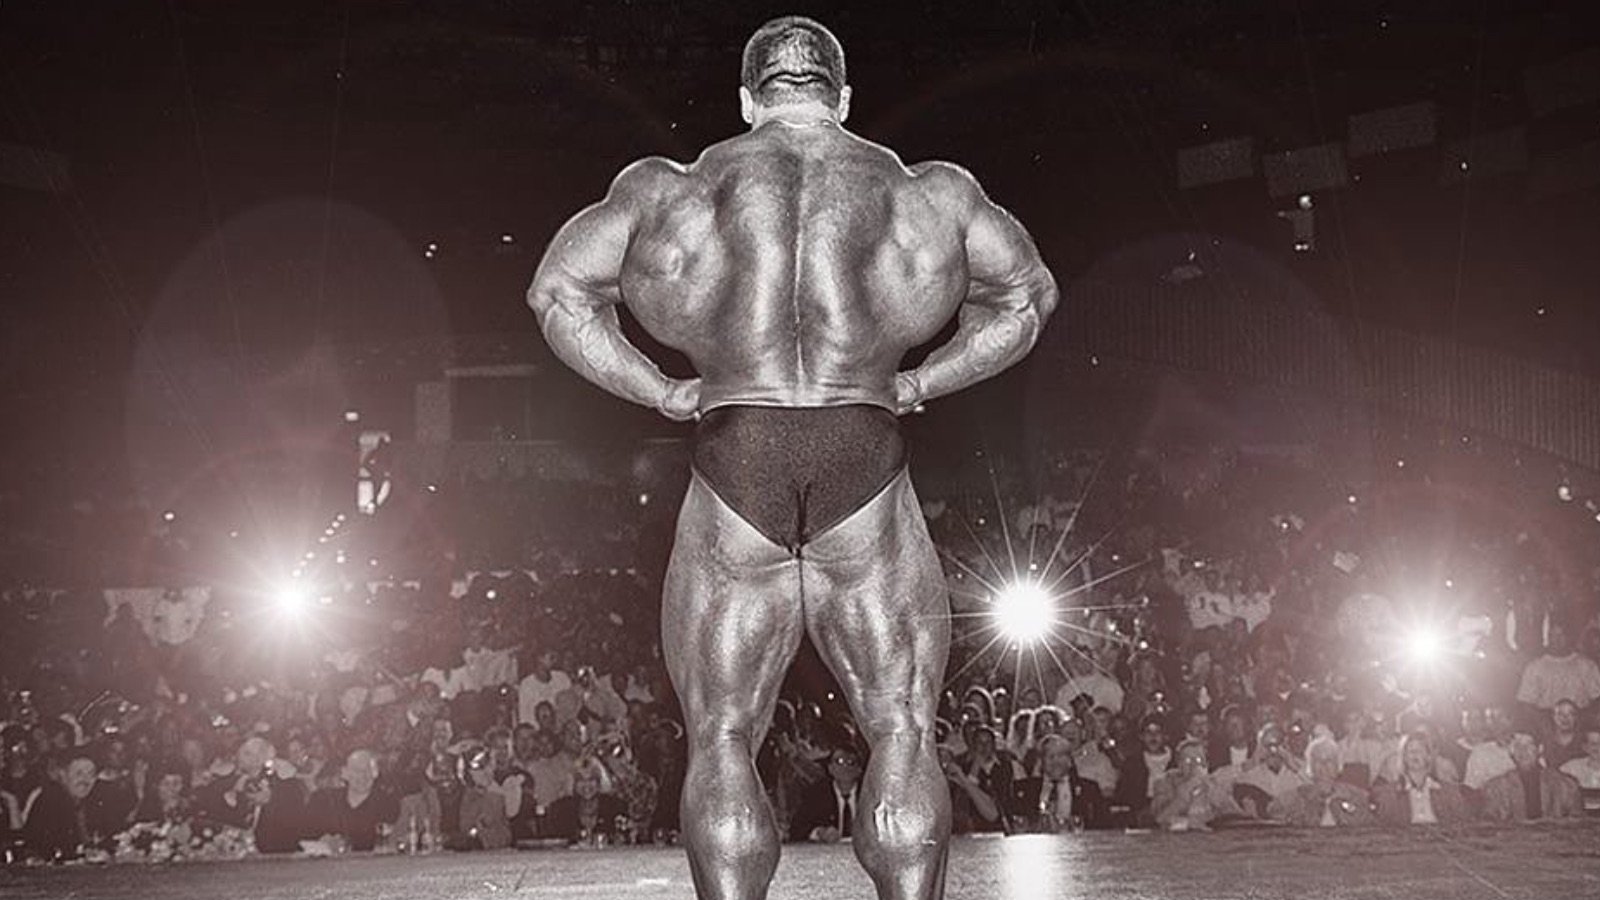 olympia-legend-dorian-yates-describes-his-favorite-back-exercise-–-breaking-muscle